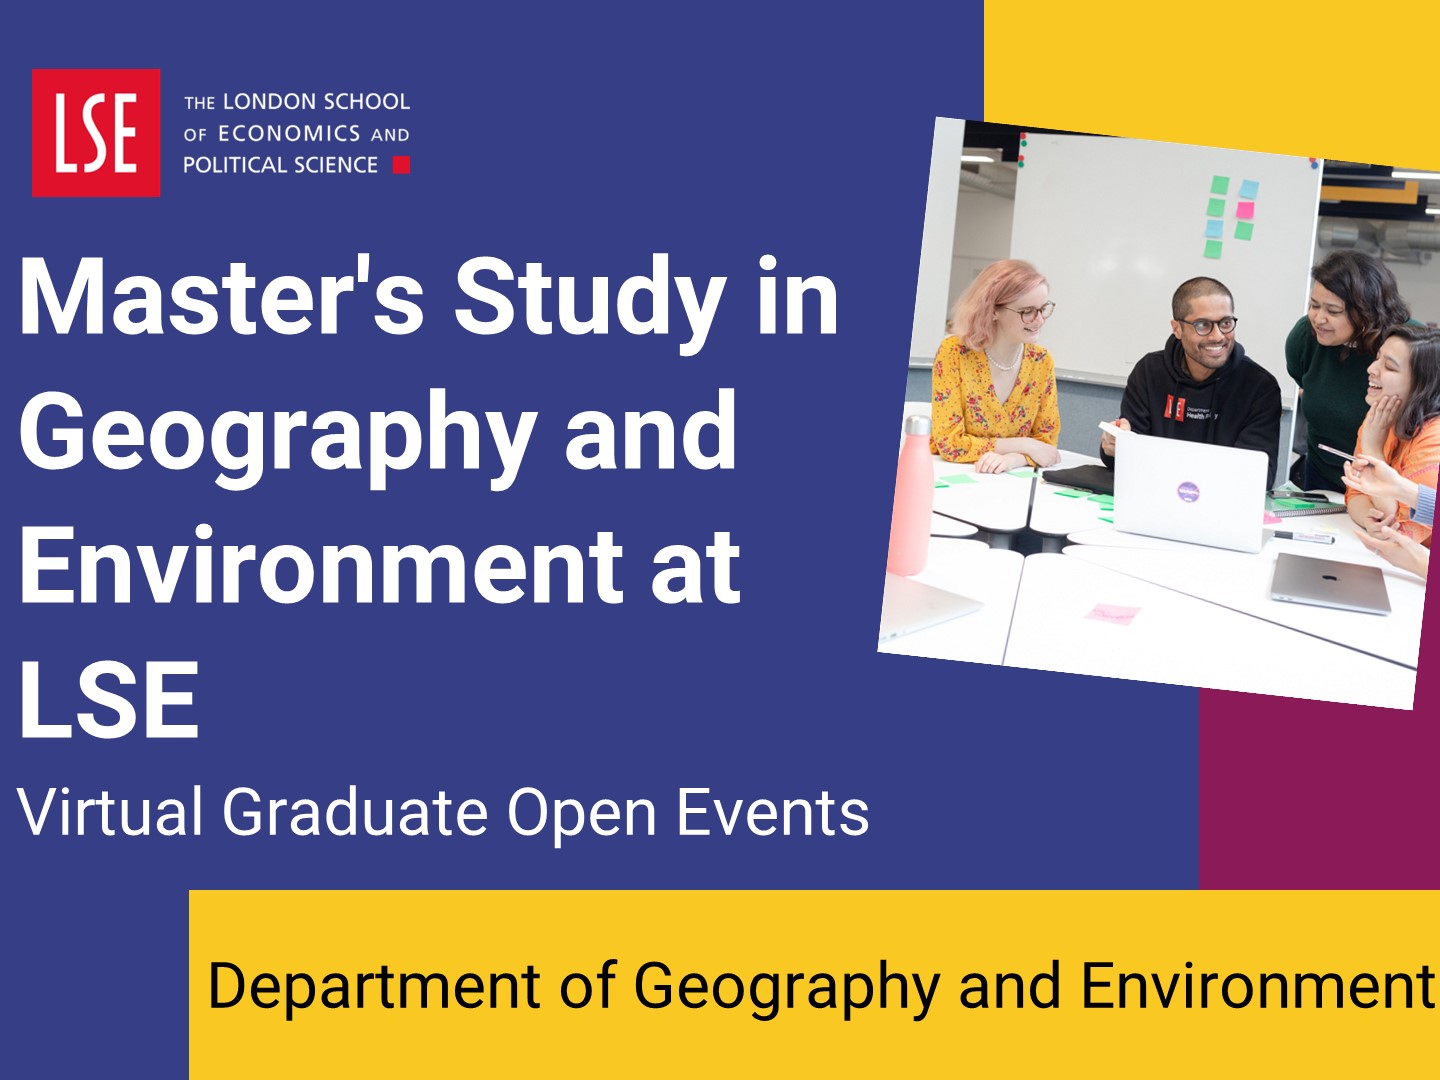 Introduction to master's study in Geography and Environment at LSE